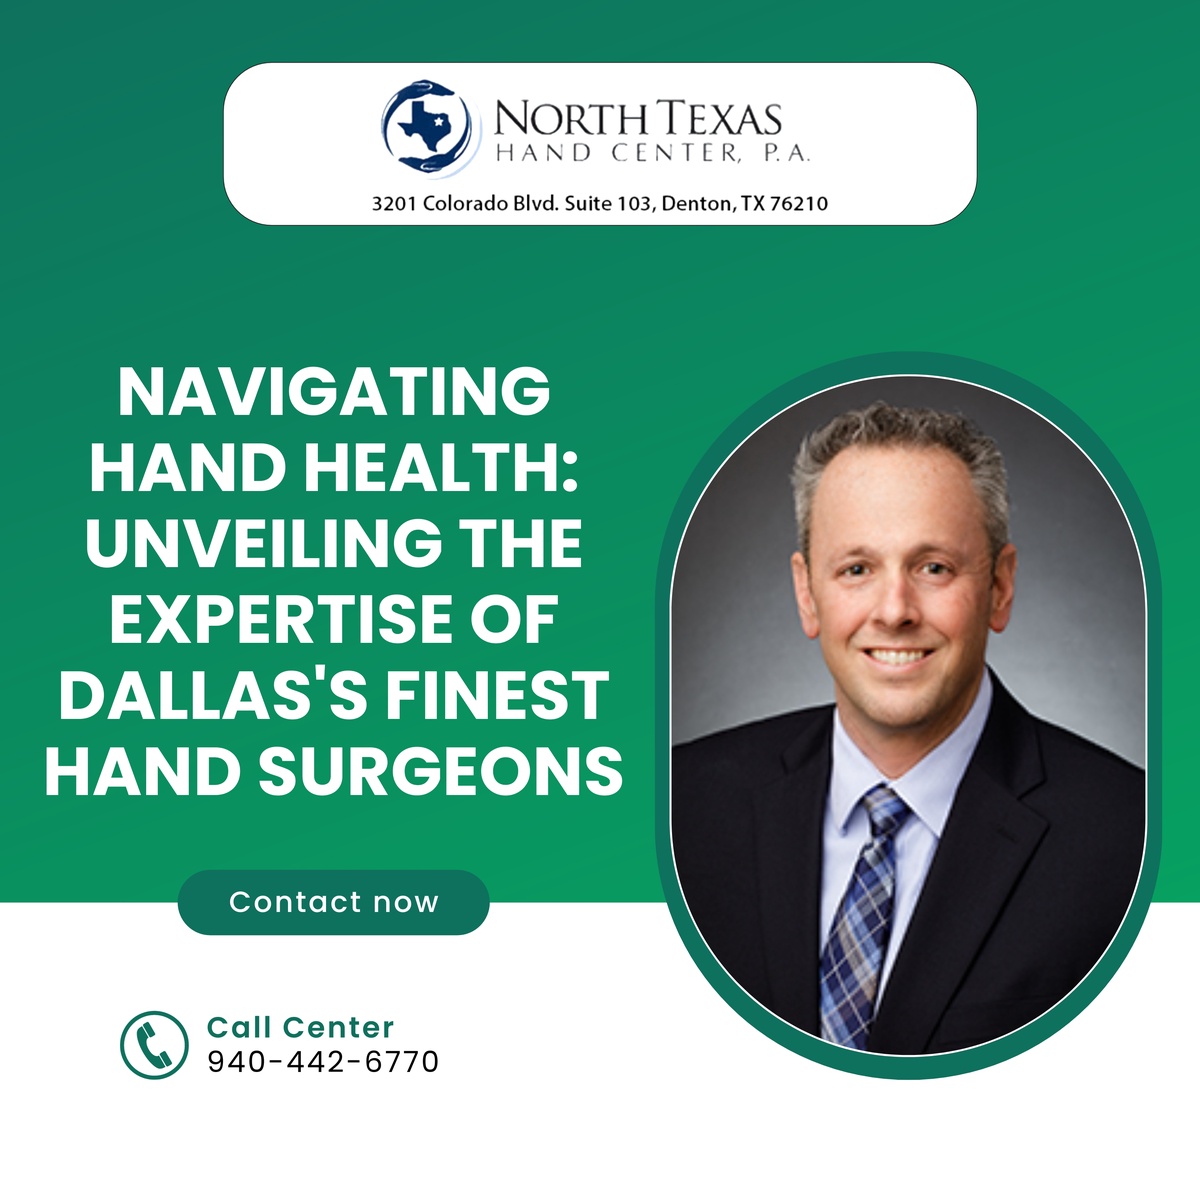 Navigating Hand Health: Unveiling the Expertise of Dallas's Finest Hand Surgeons